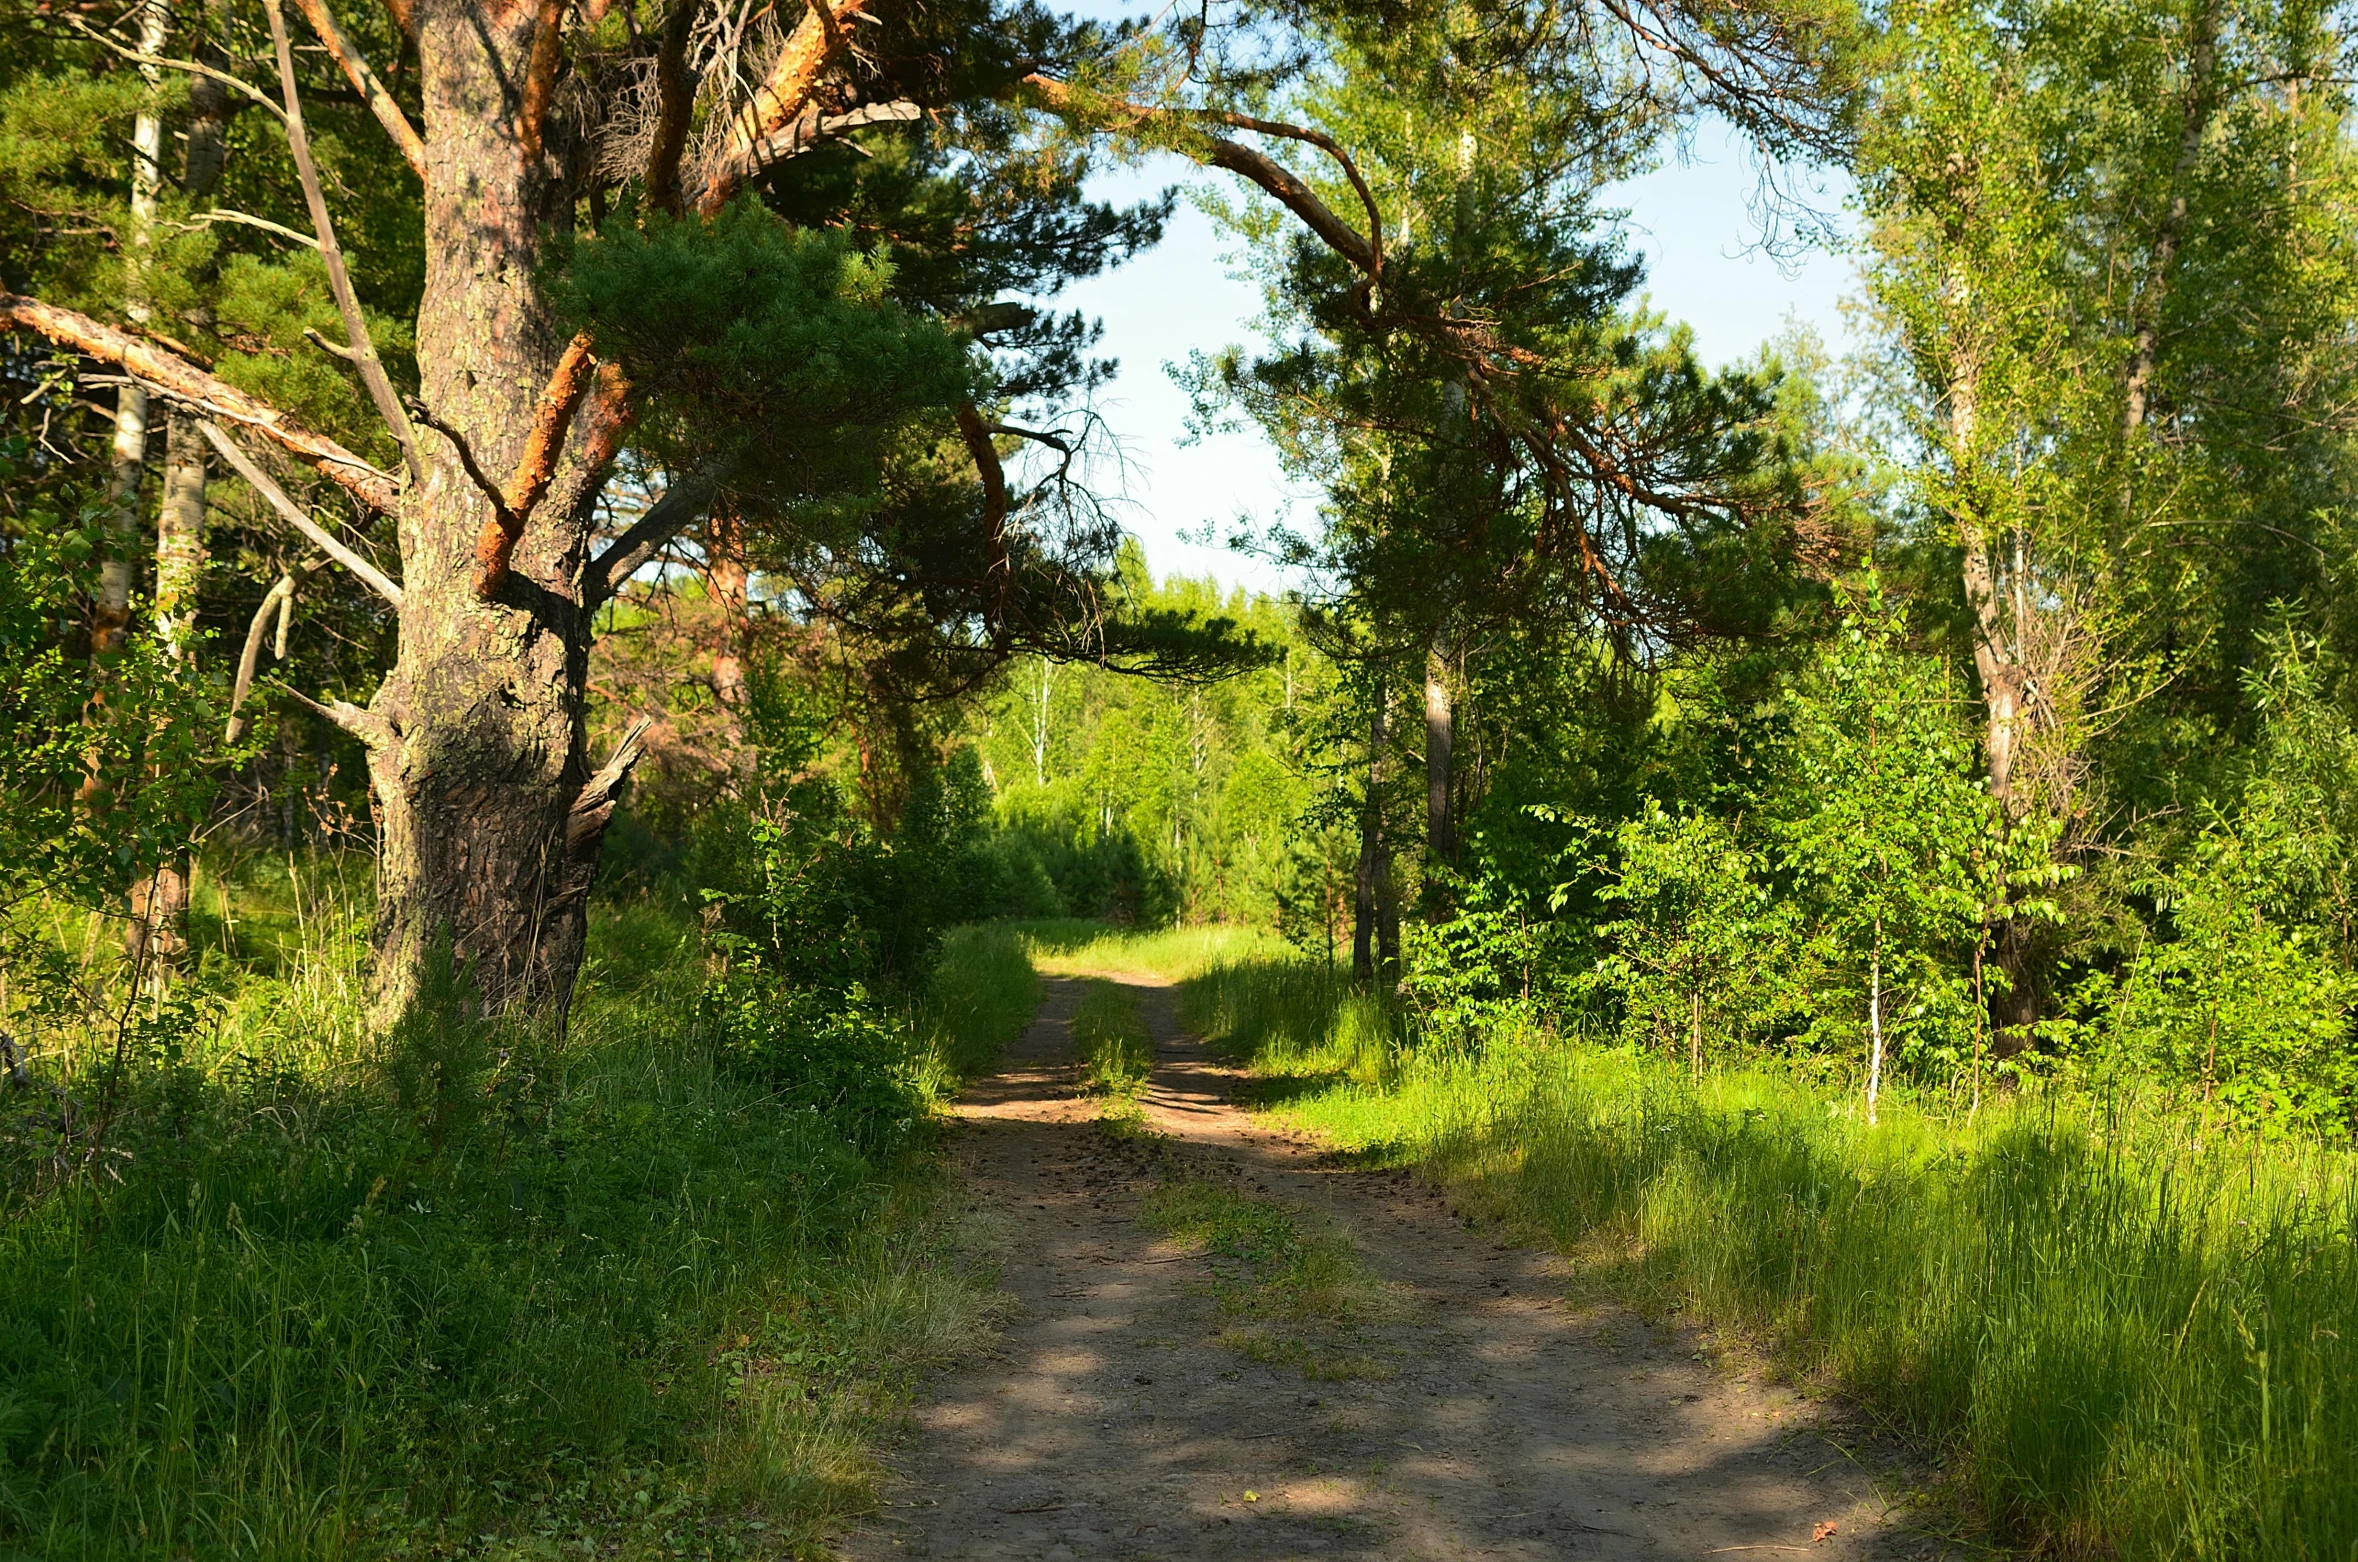 a dirt path near trees and grass with the sign showing